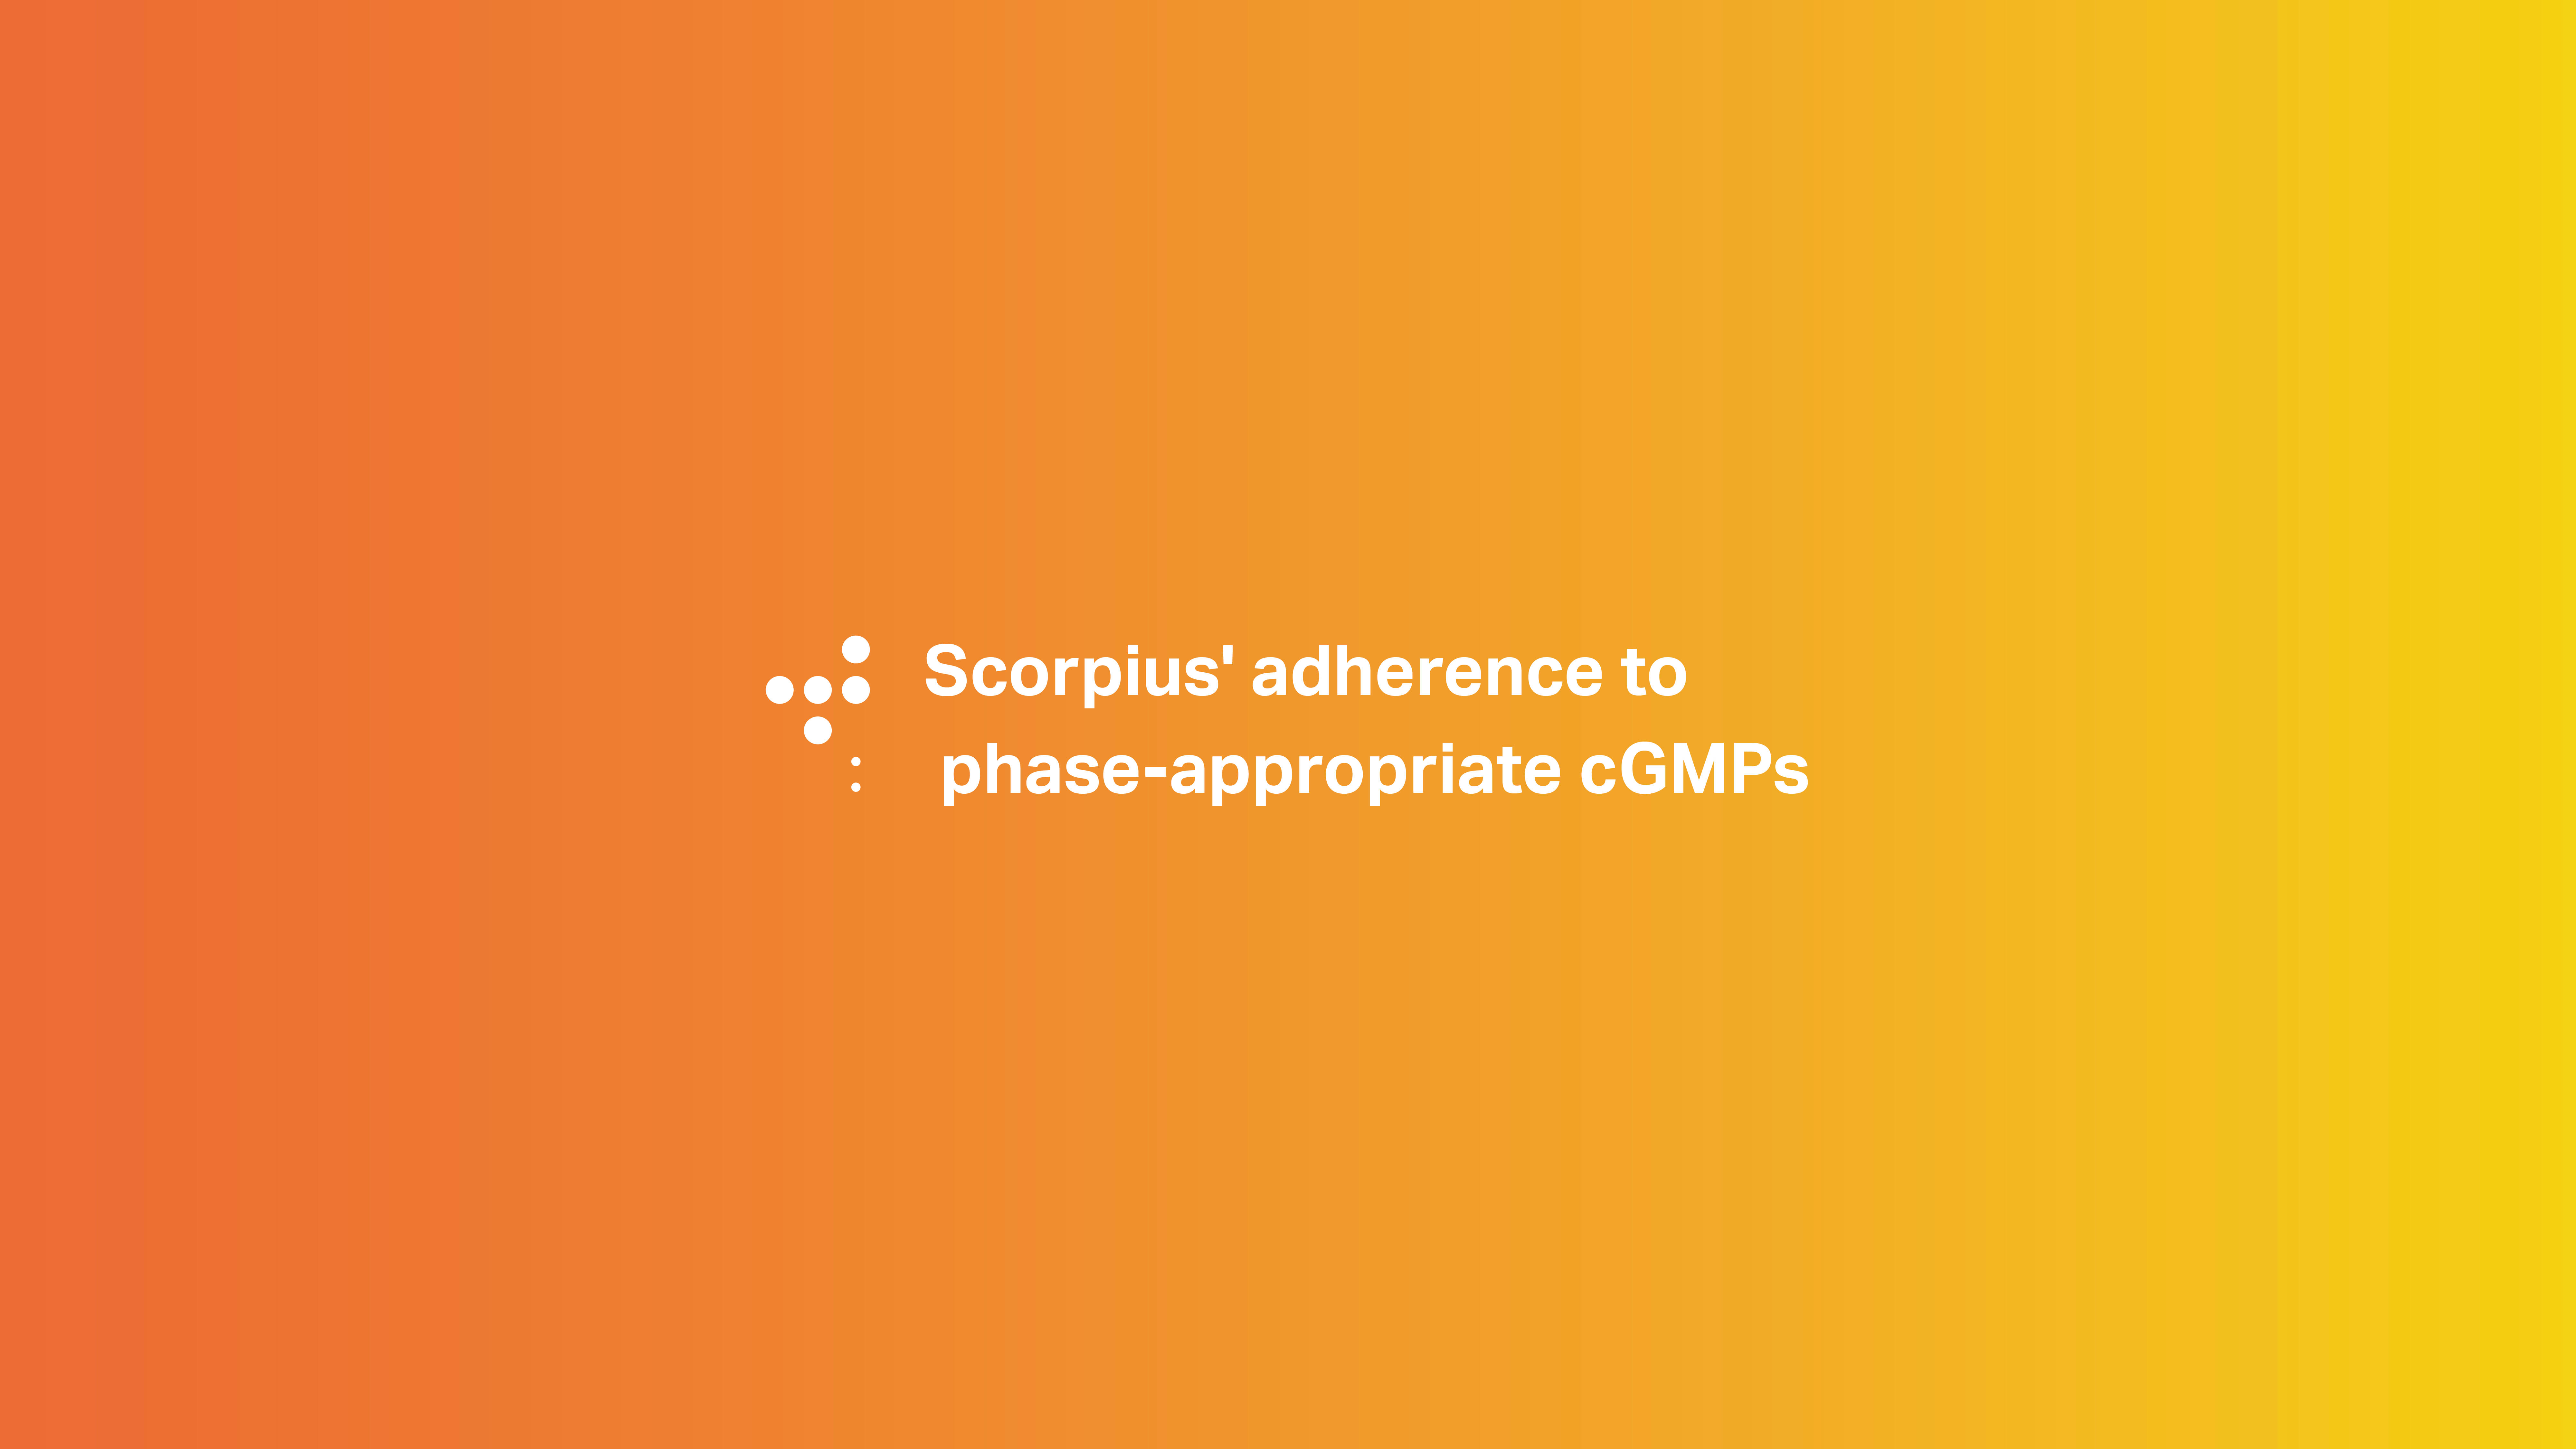 Scorpius' adherence to phase-appropriate cGMPs